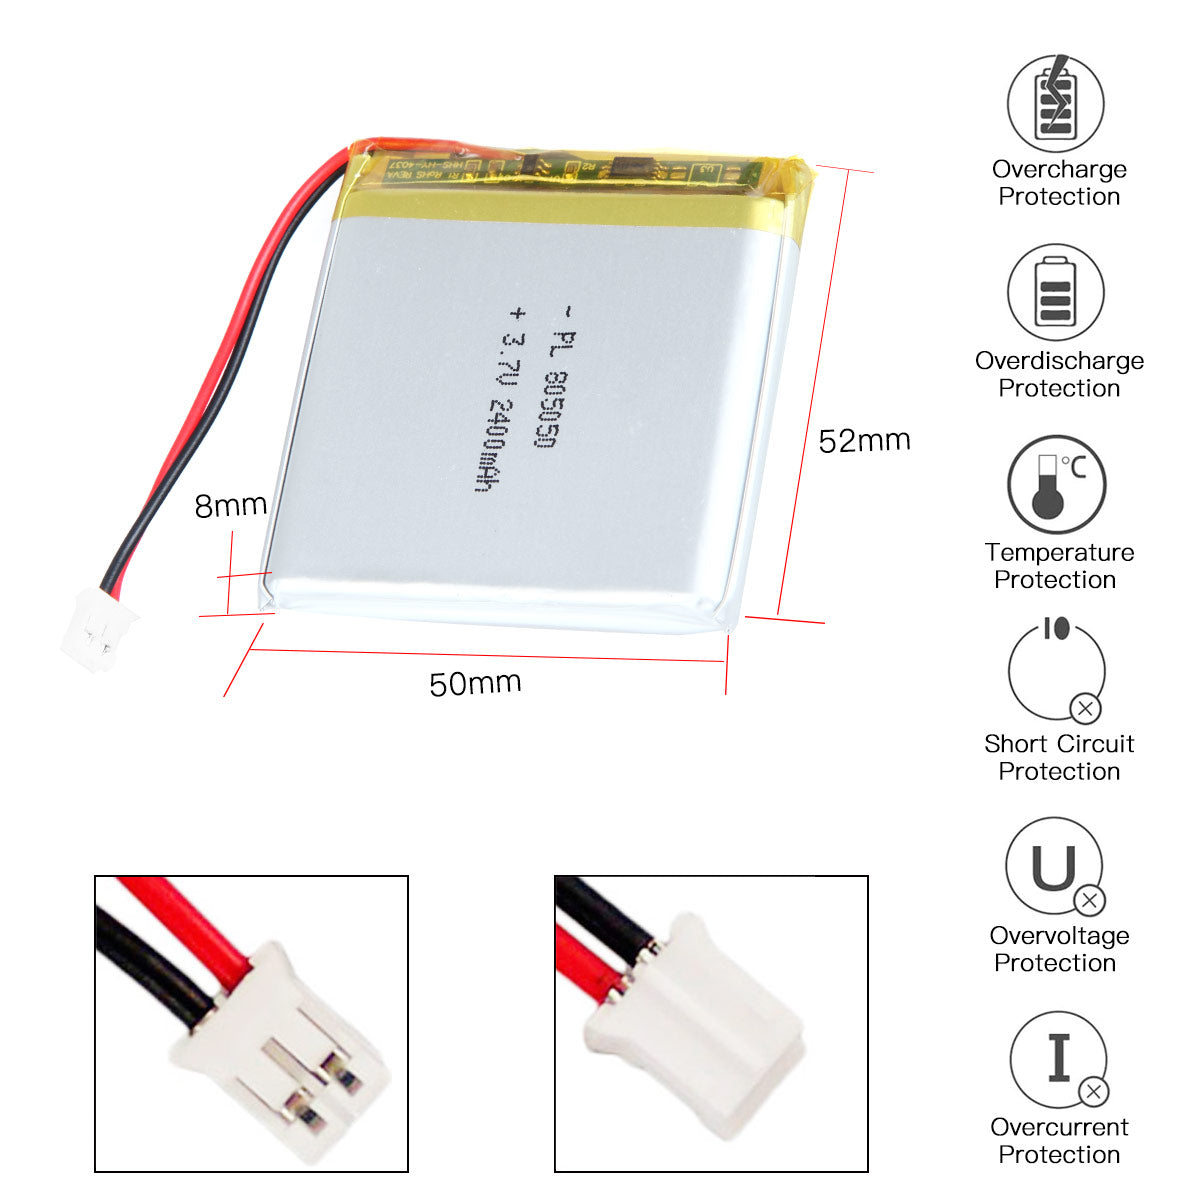 YDL 3.7V 2400mAh 805050 Rechargeable Lithium Polymer Battery